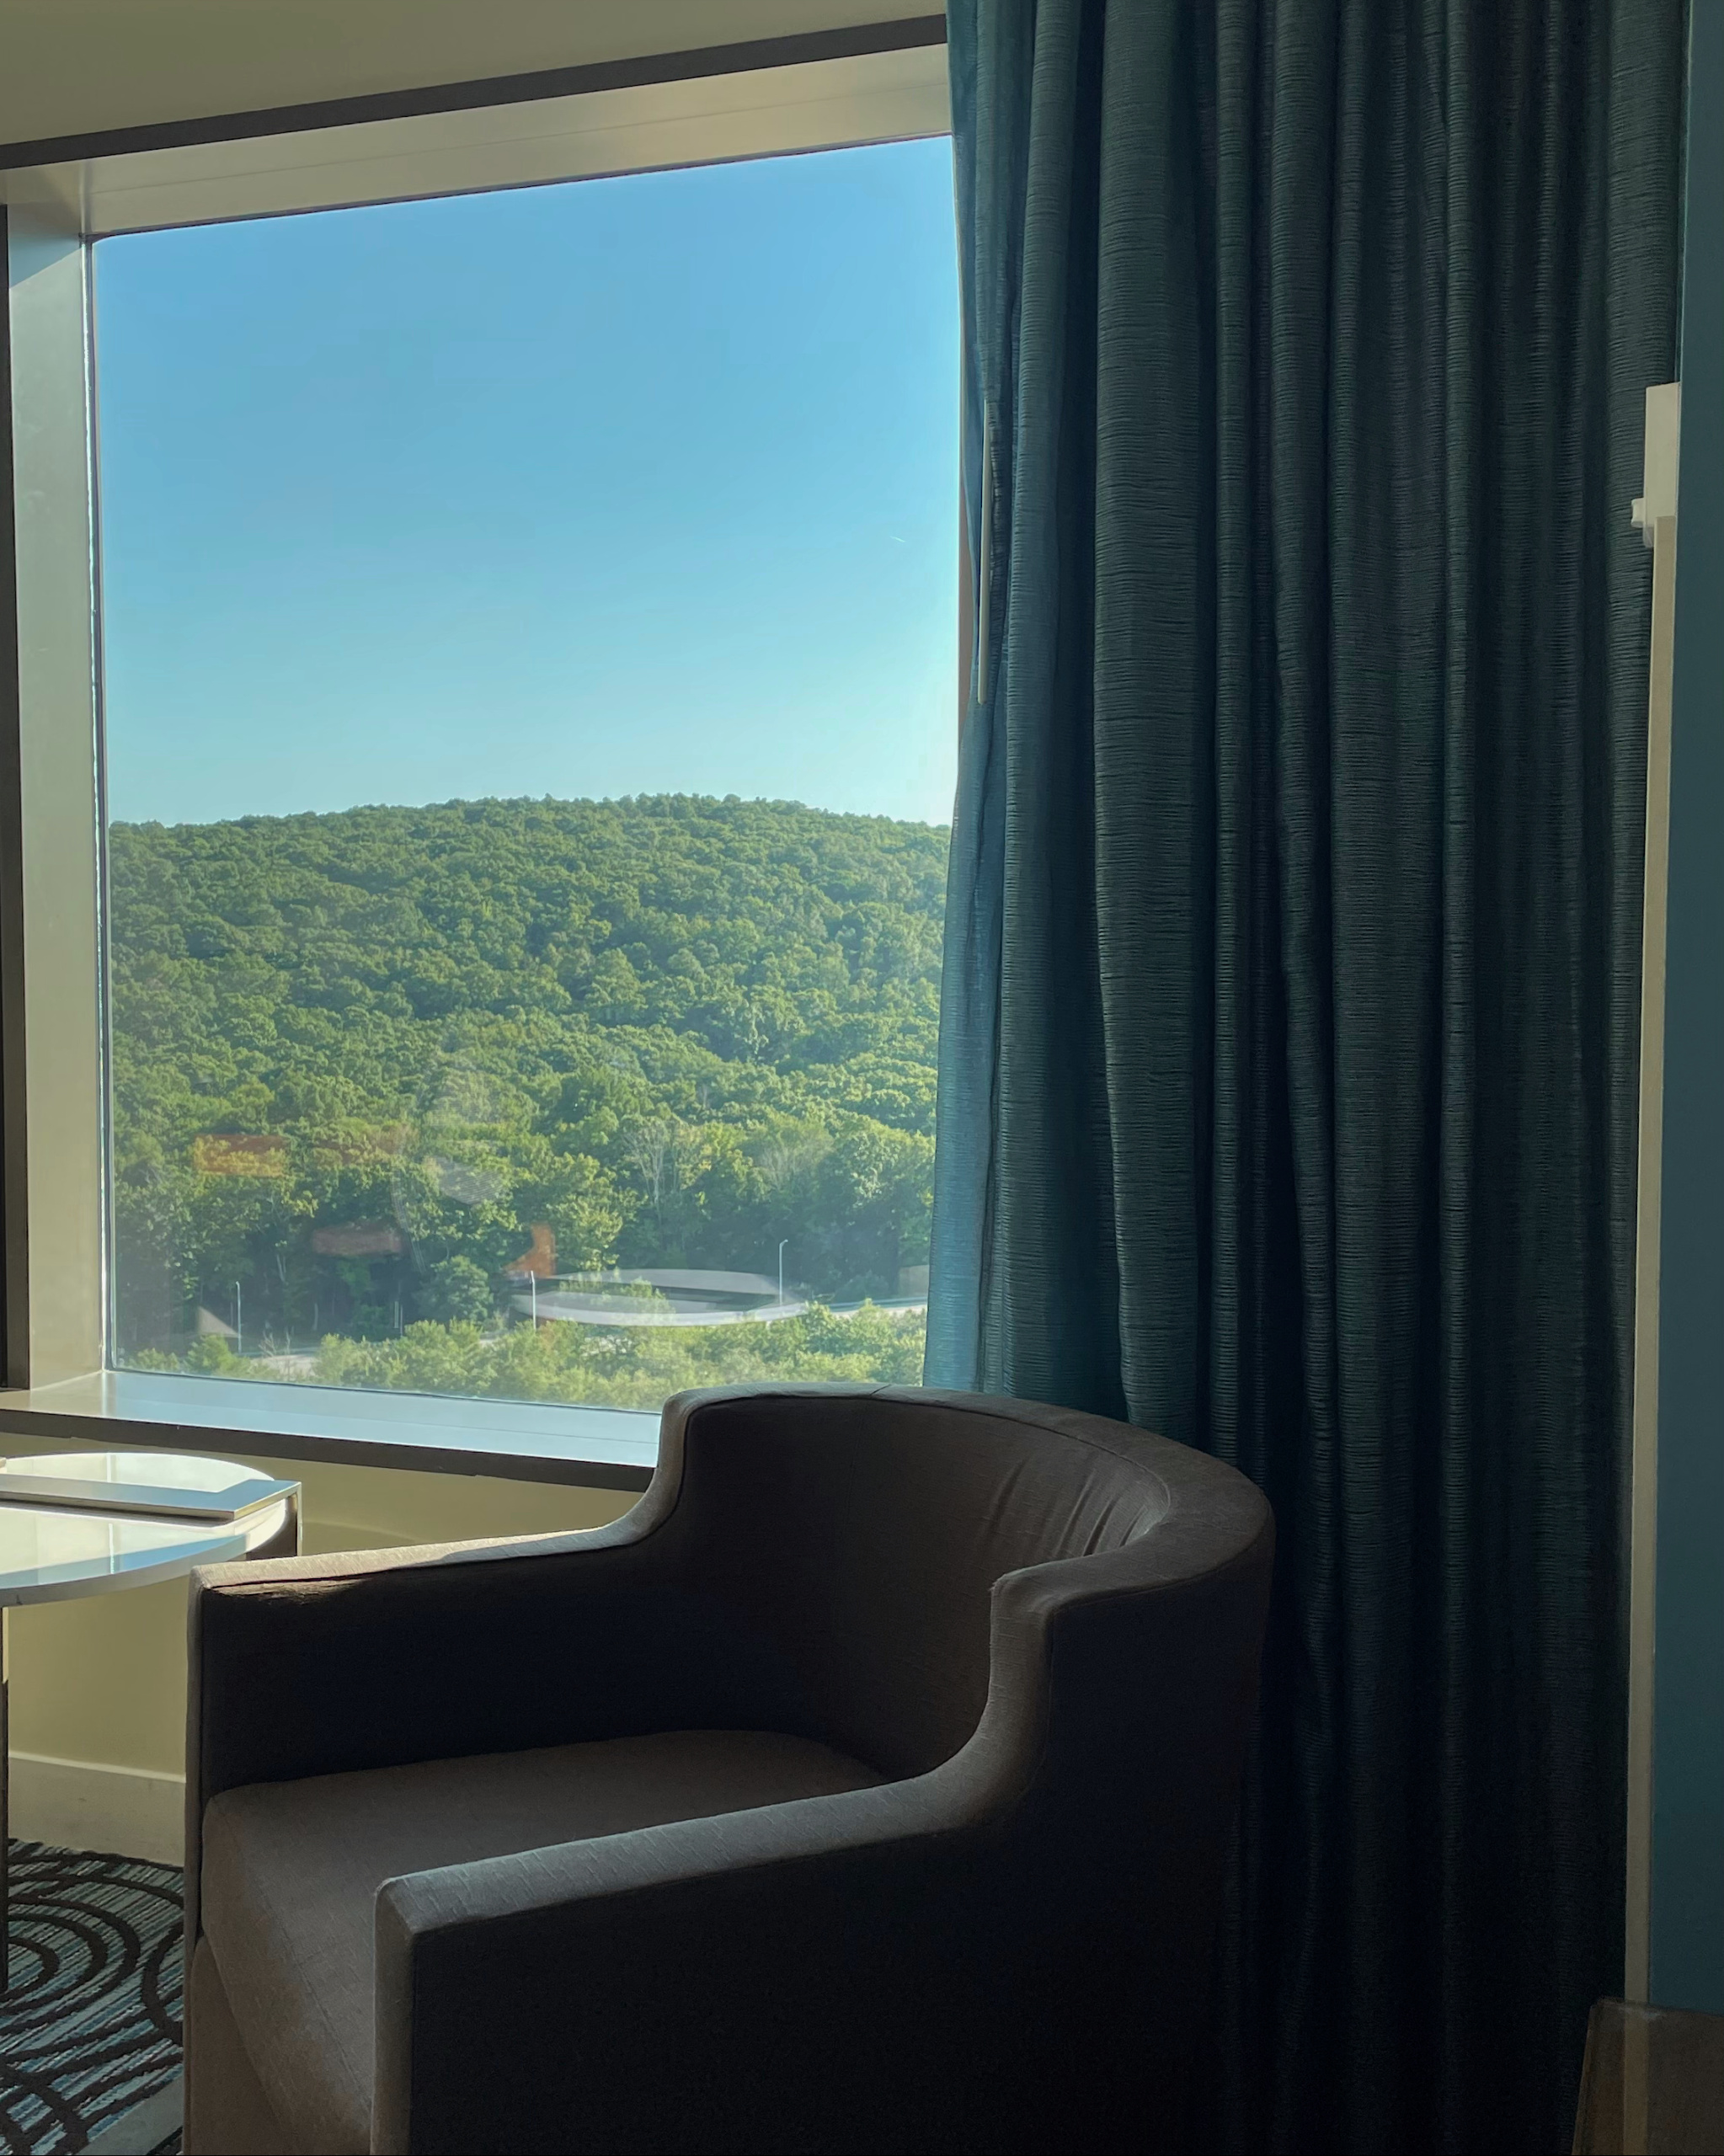 How To Have An Epic Experience at Foxwoods Resort Guide